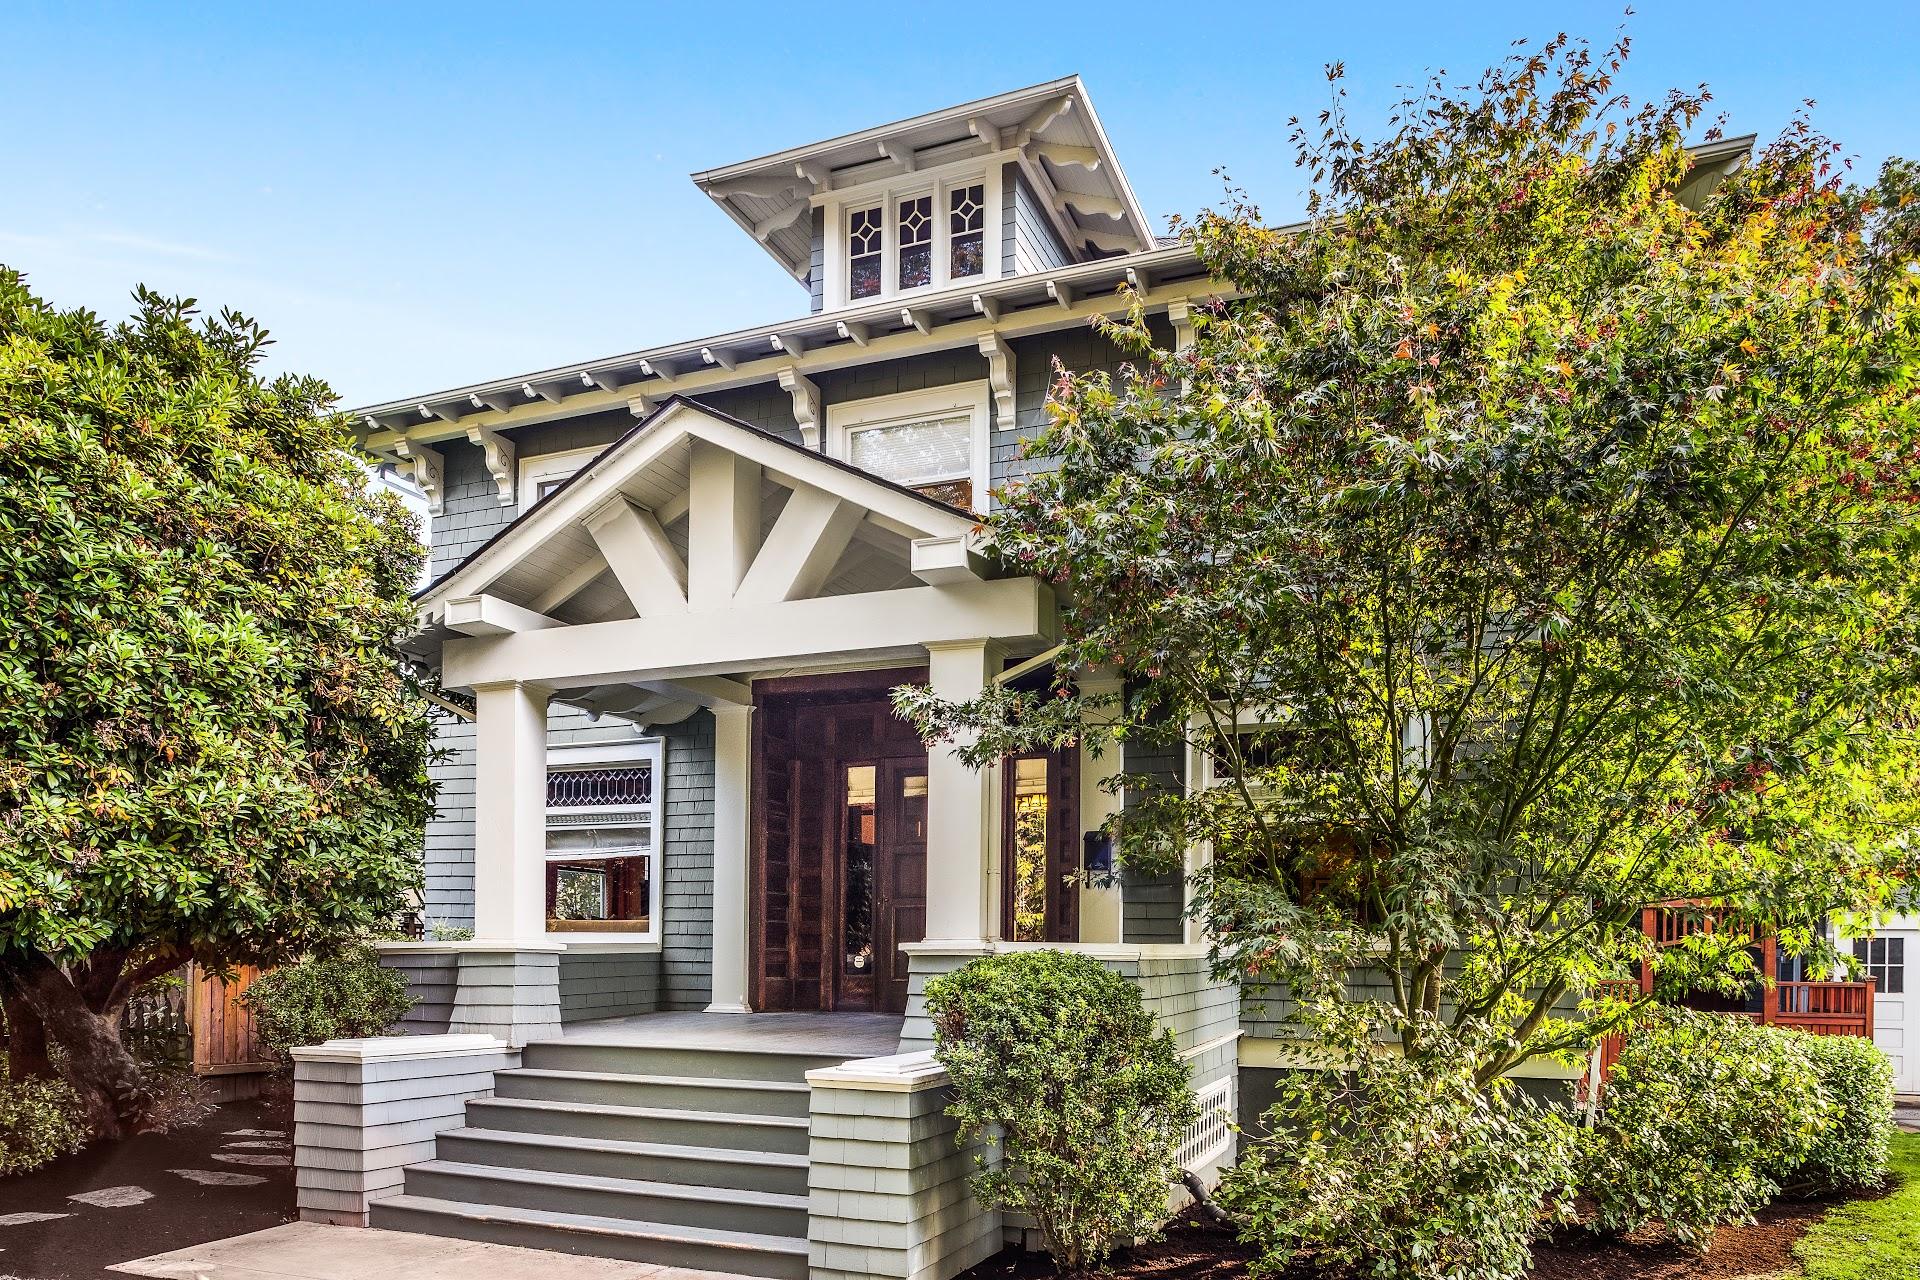 Historic Irvington Craftsman: If these walls could talk…